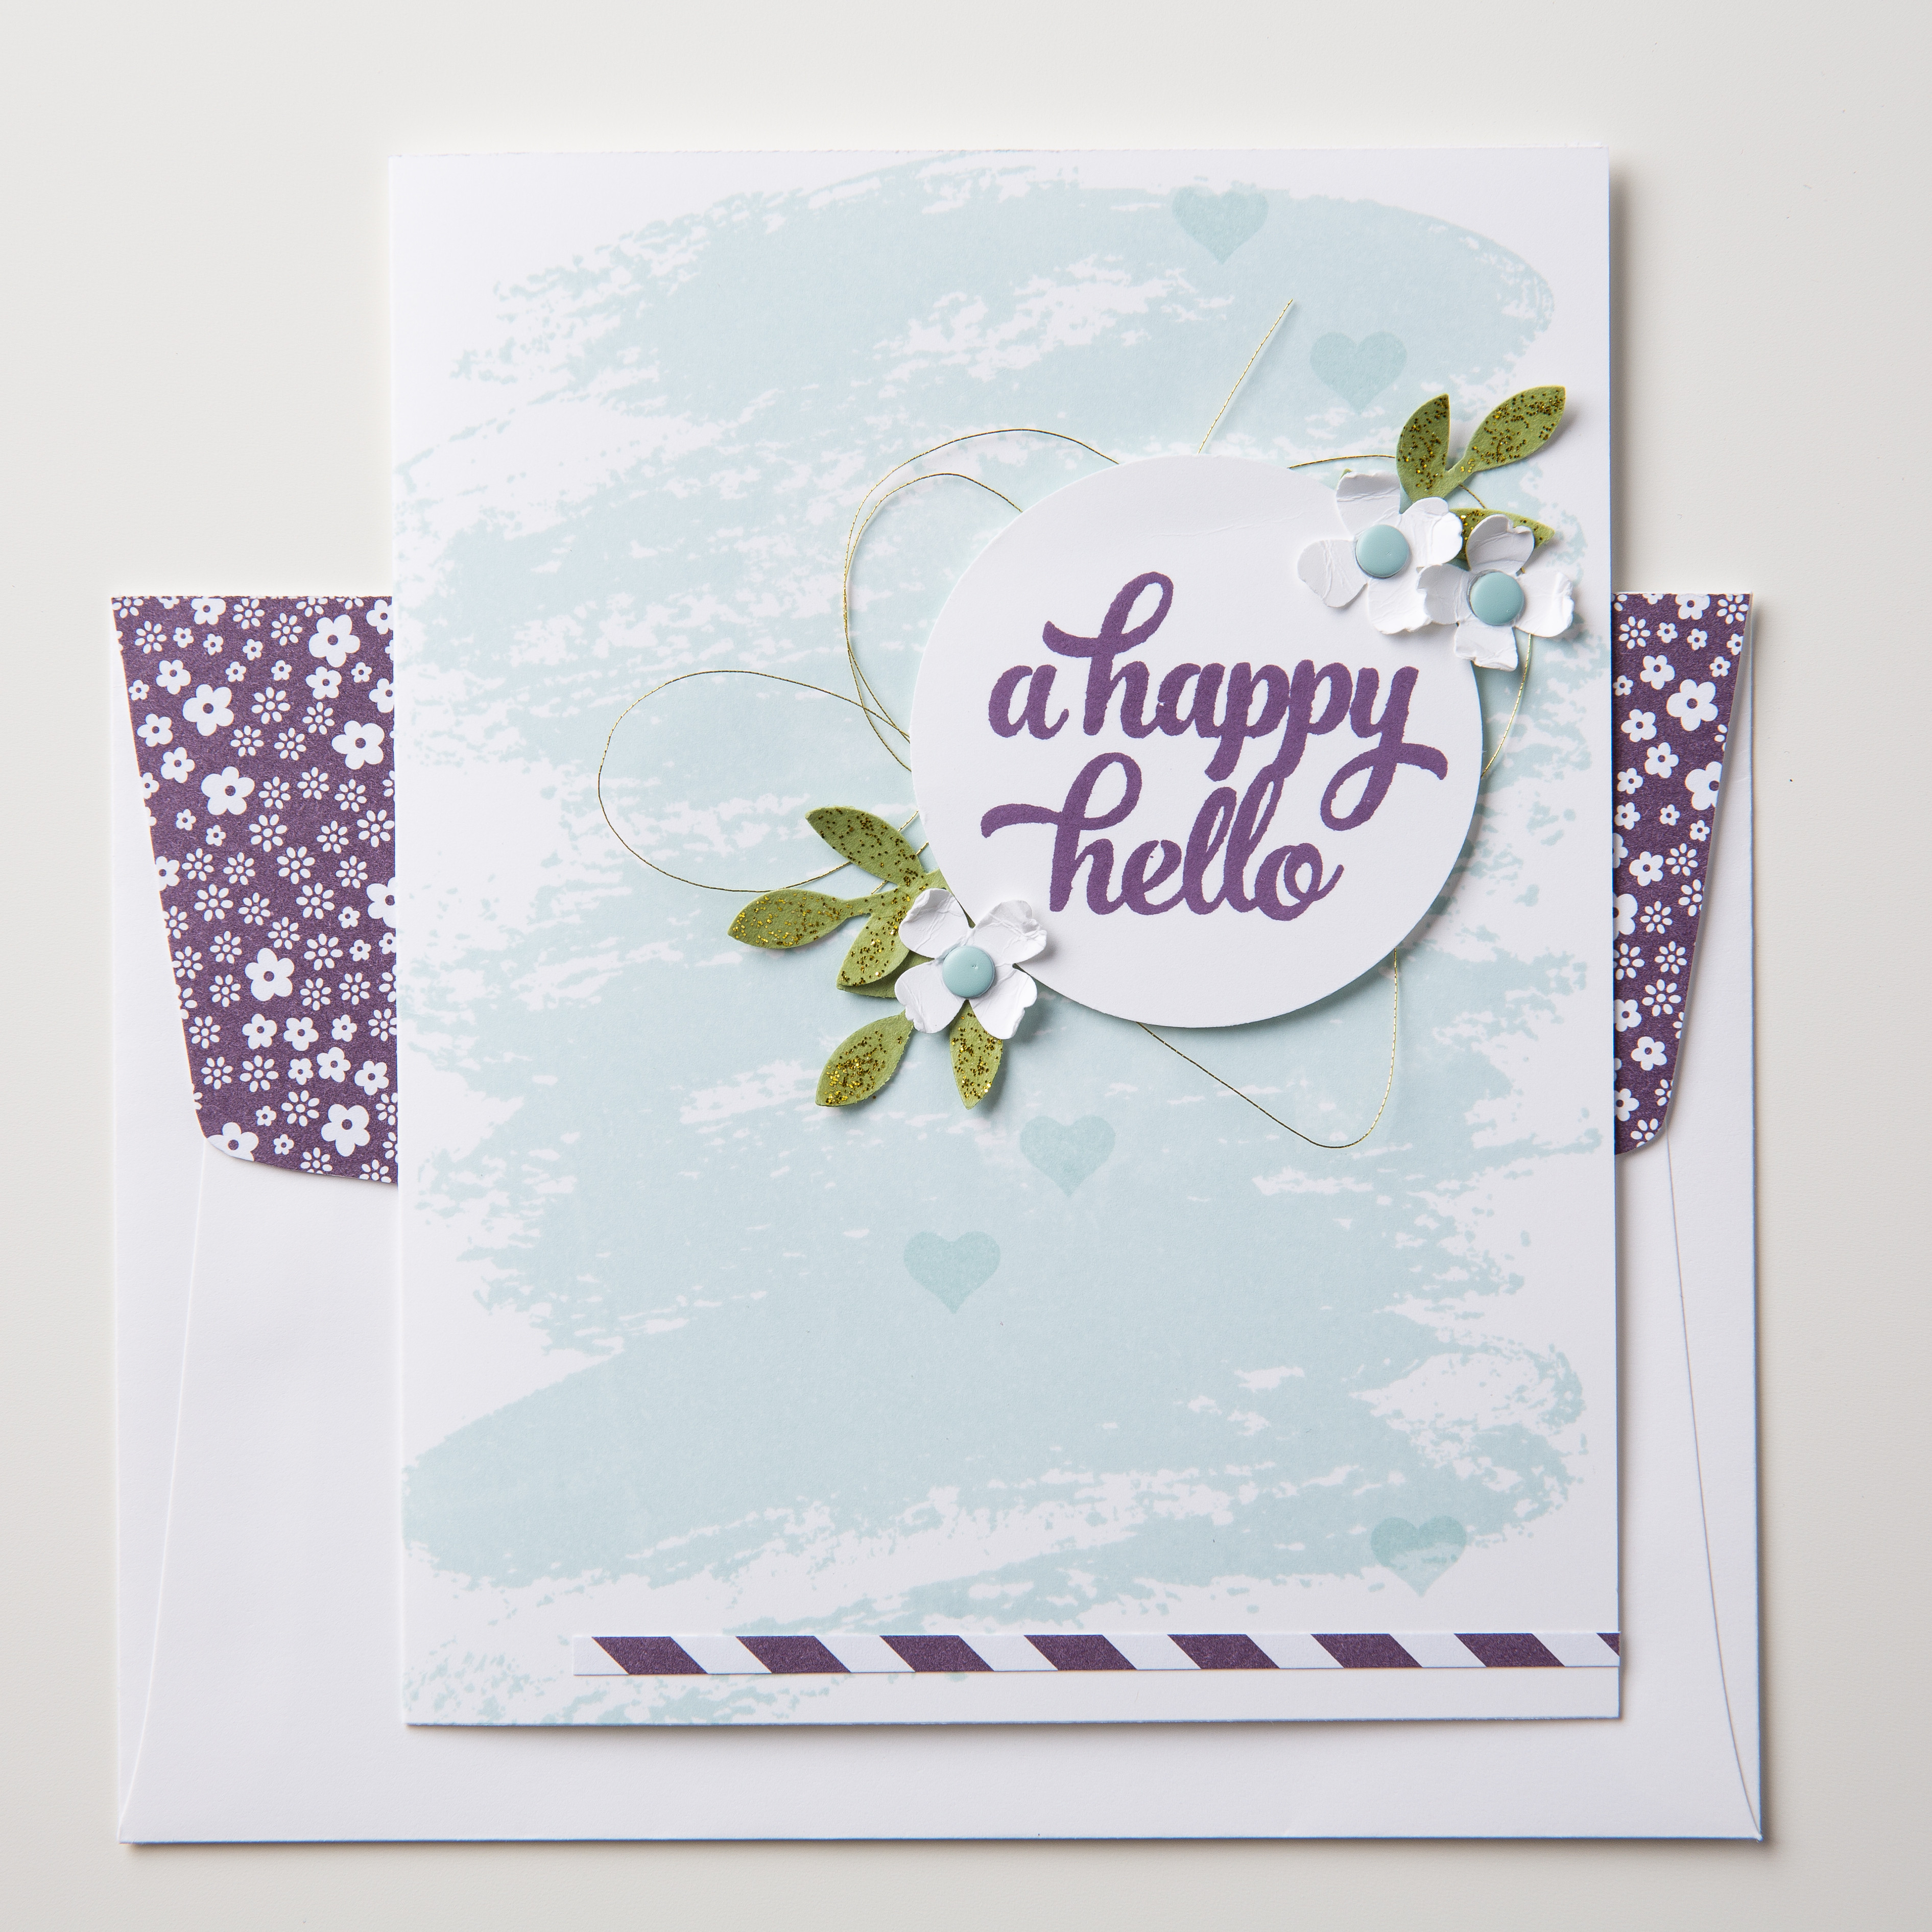 Mothers Birthday Card Ideas Simple Greeting For Mothers Birthday Homemade Card Ideas Mom From